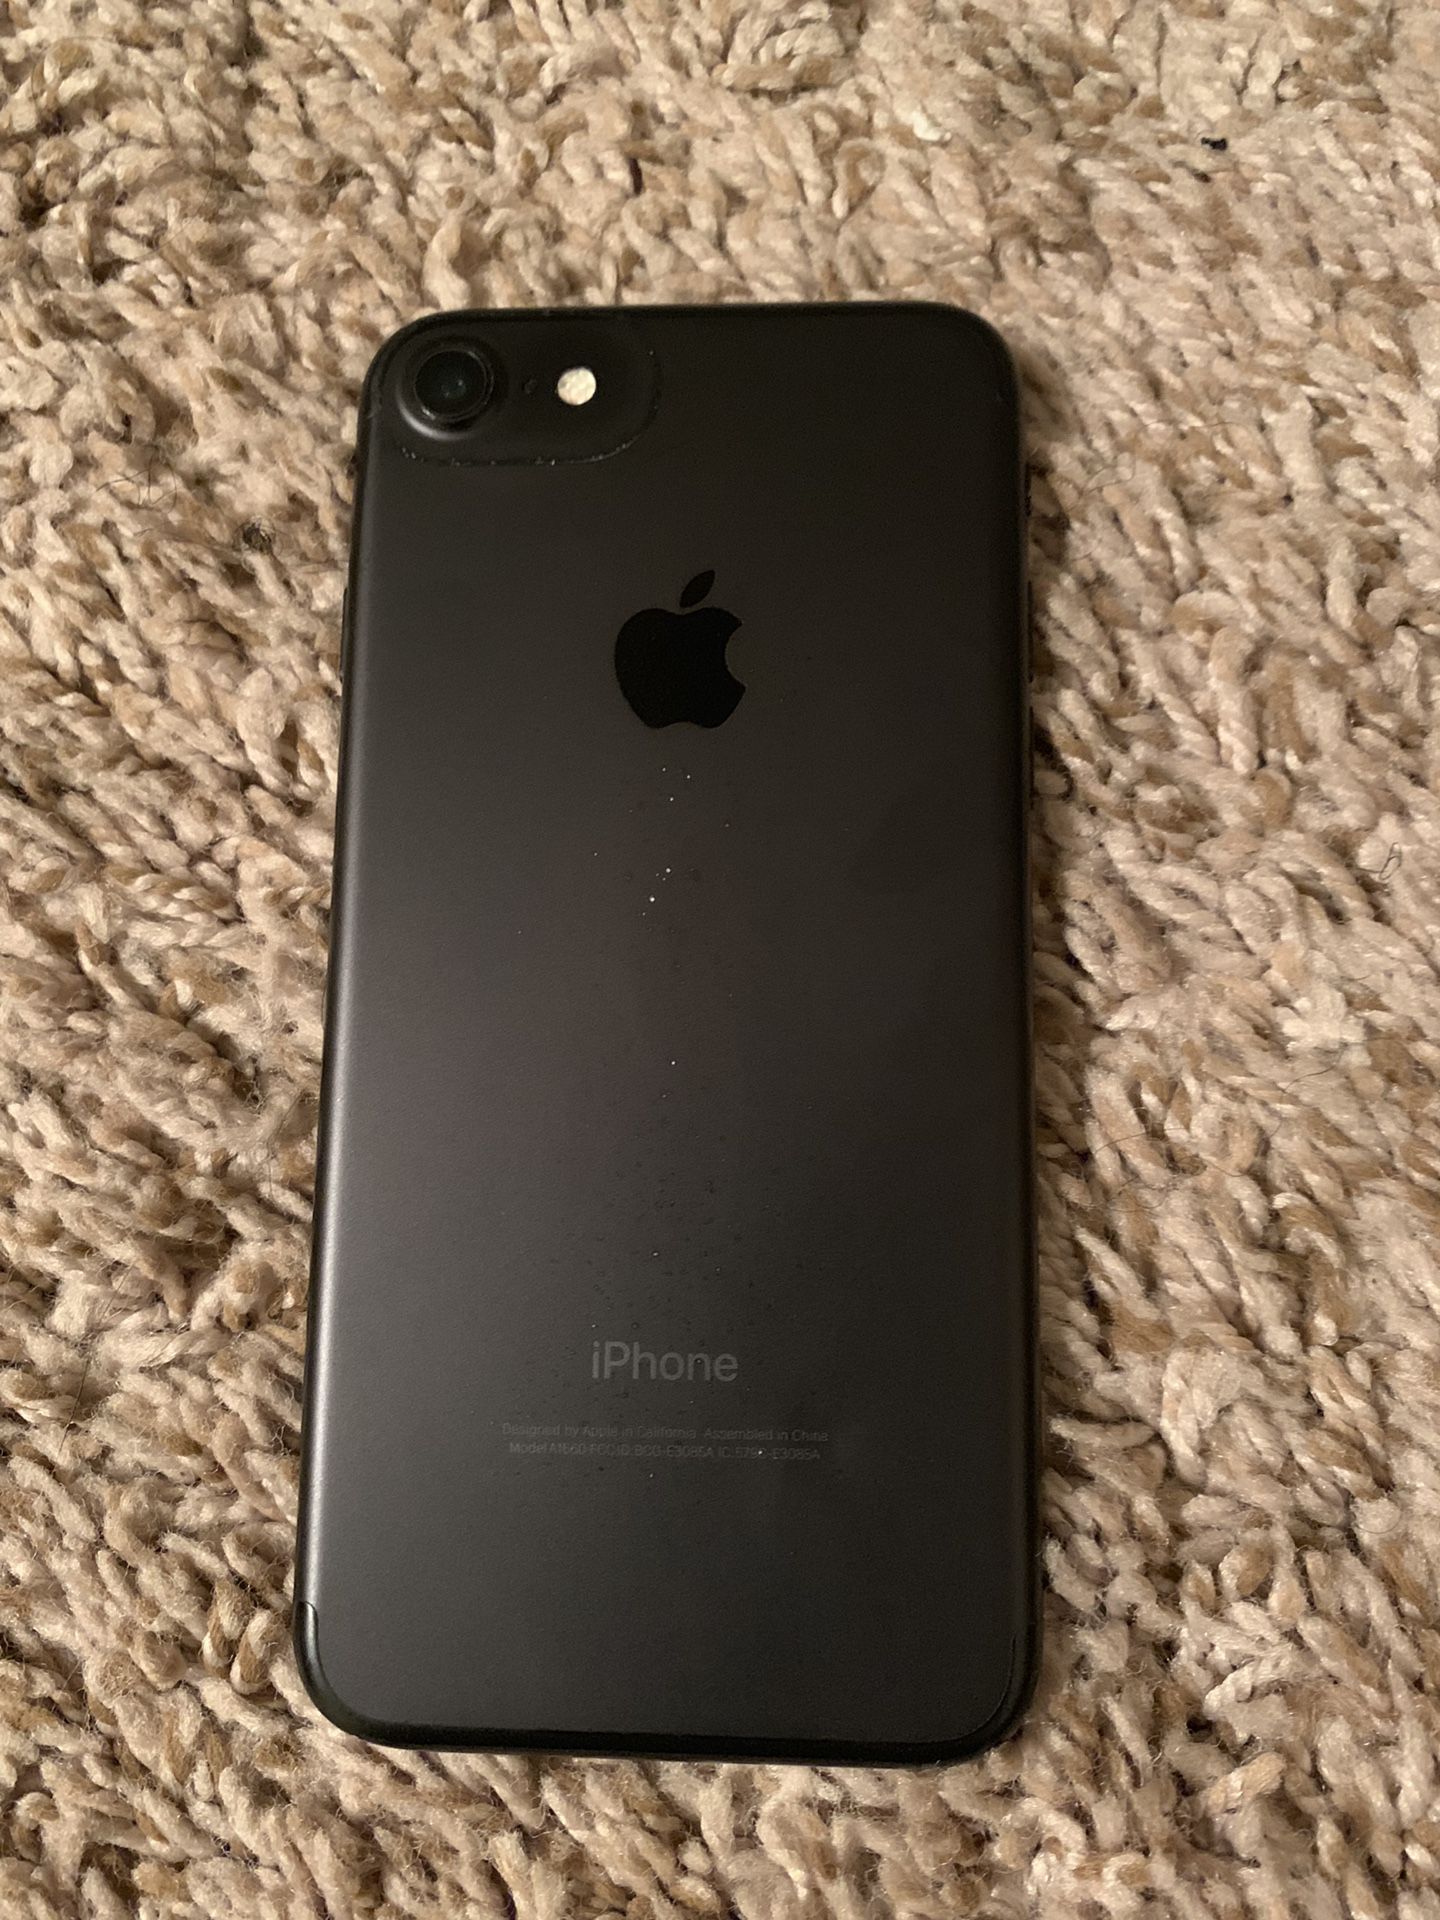 Excellent condition iPhone 7